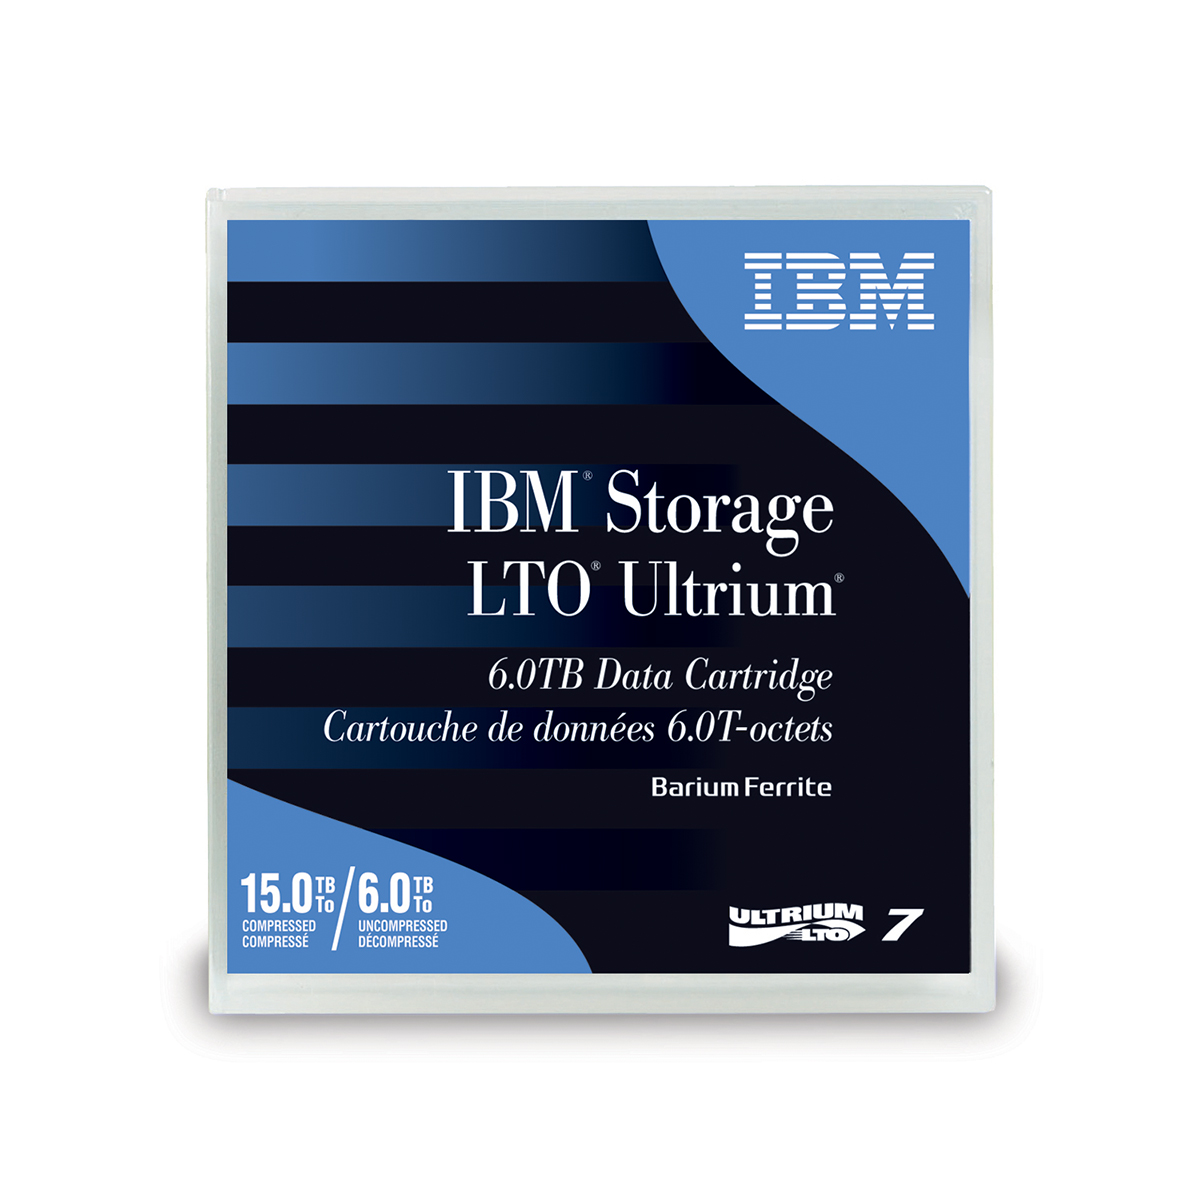 You may also be interested in the IBM LTO Ultrium-3 400GB/800GB. 5pk .